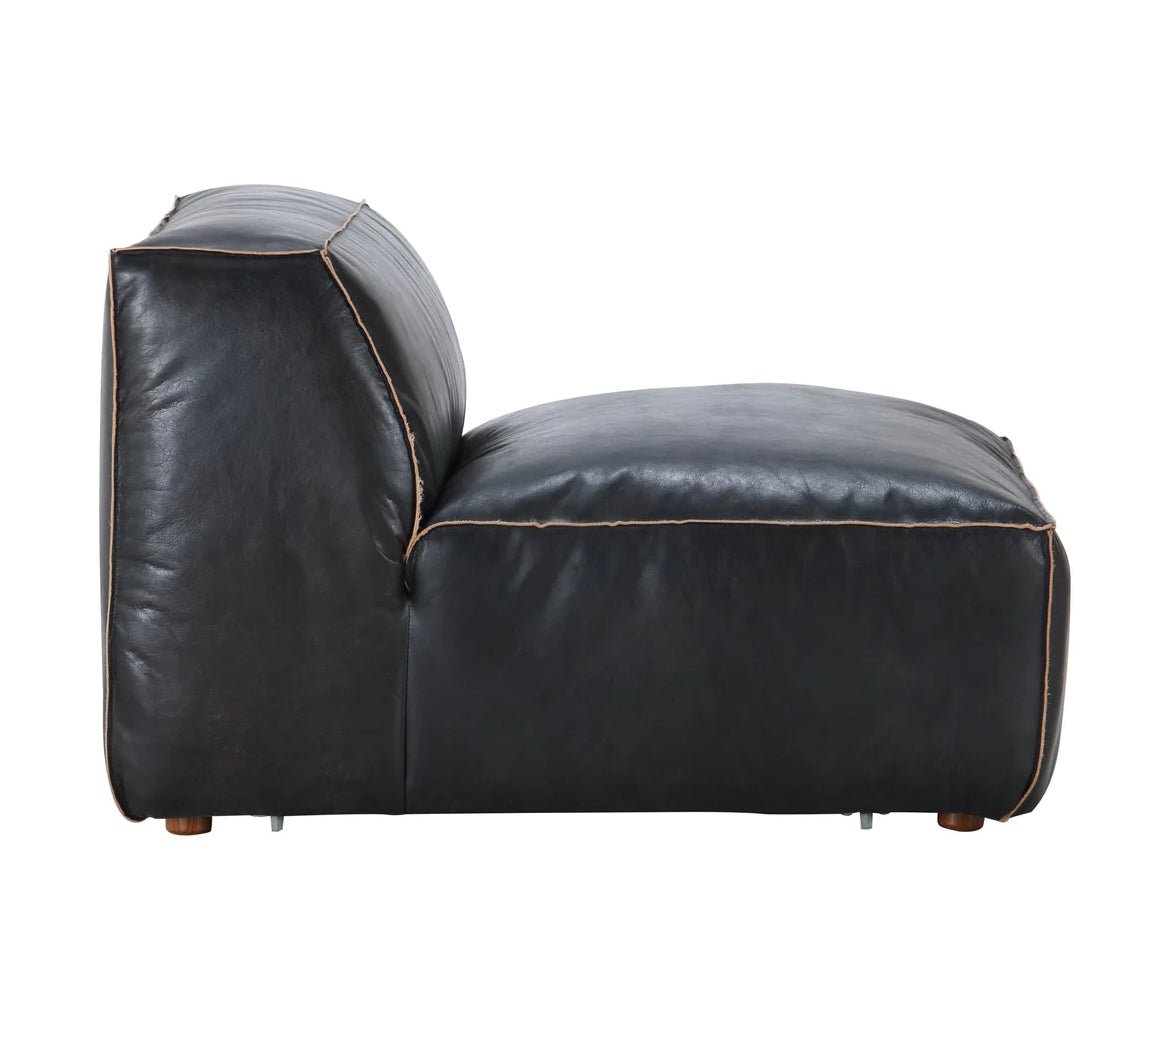 ‘Luxe’ Slipper Chair (Black) - EcoLuxe Furnishings